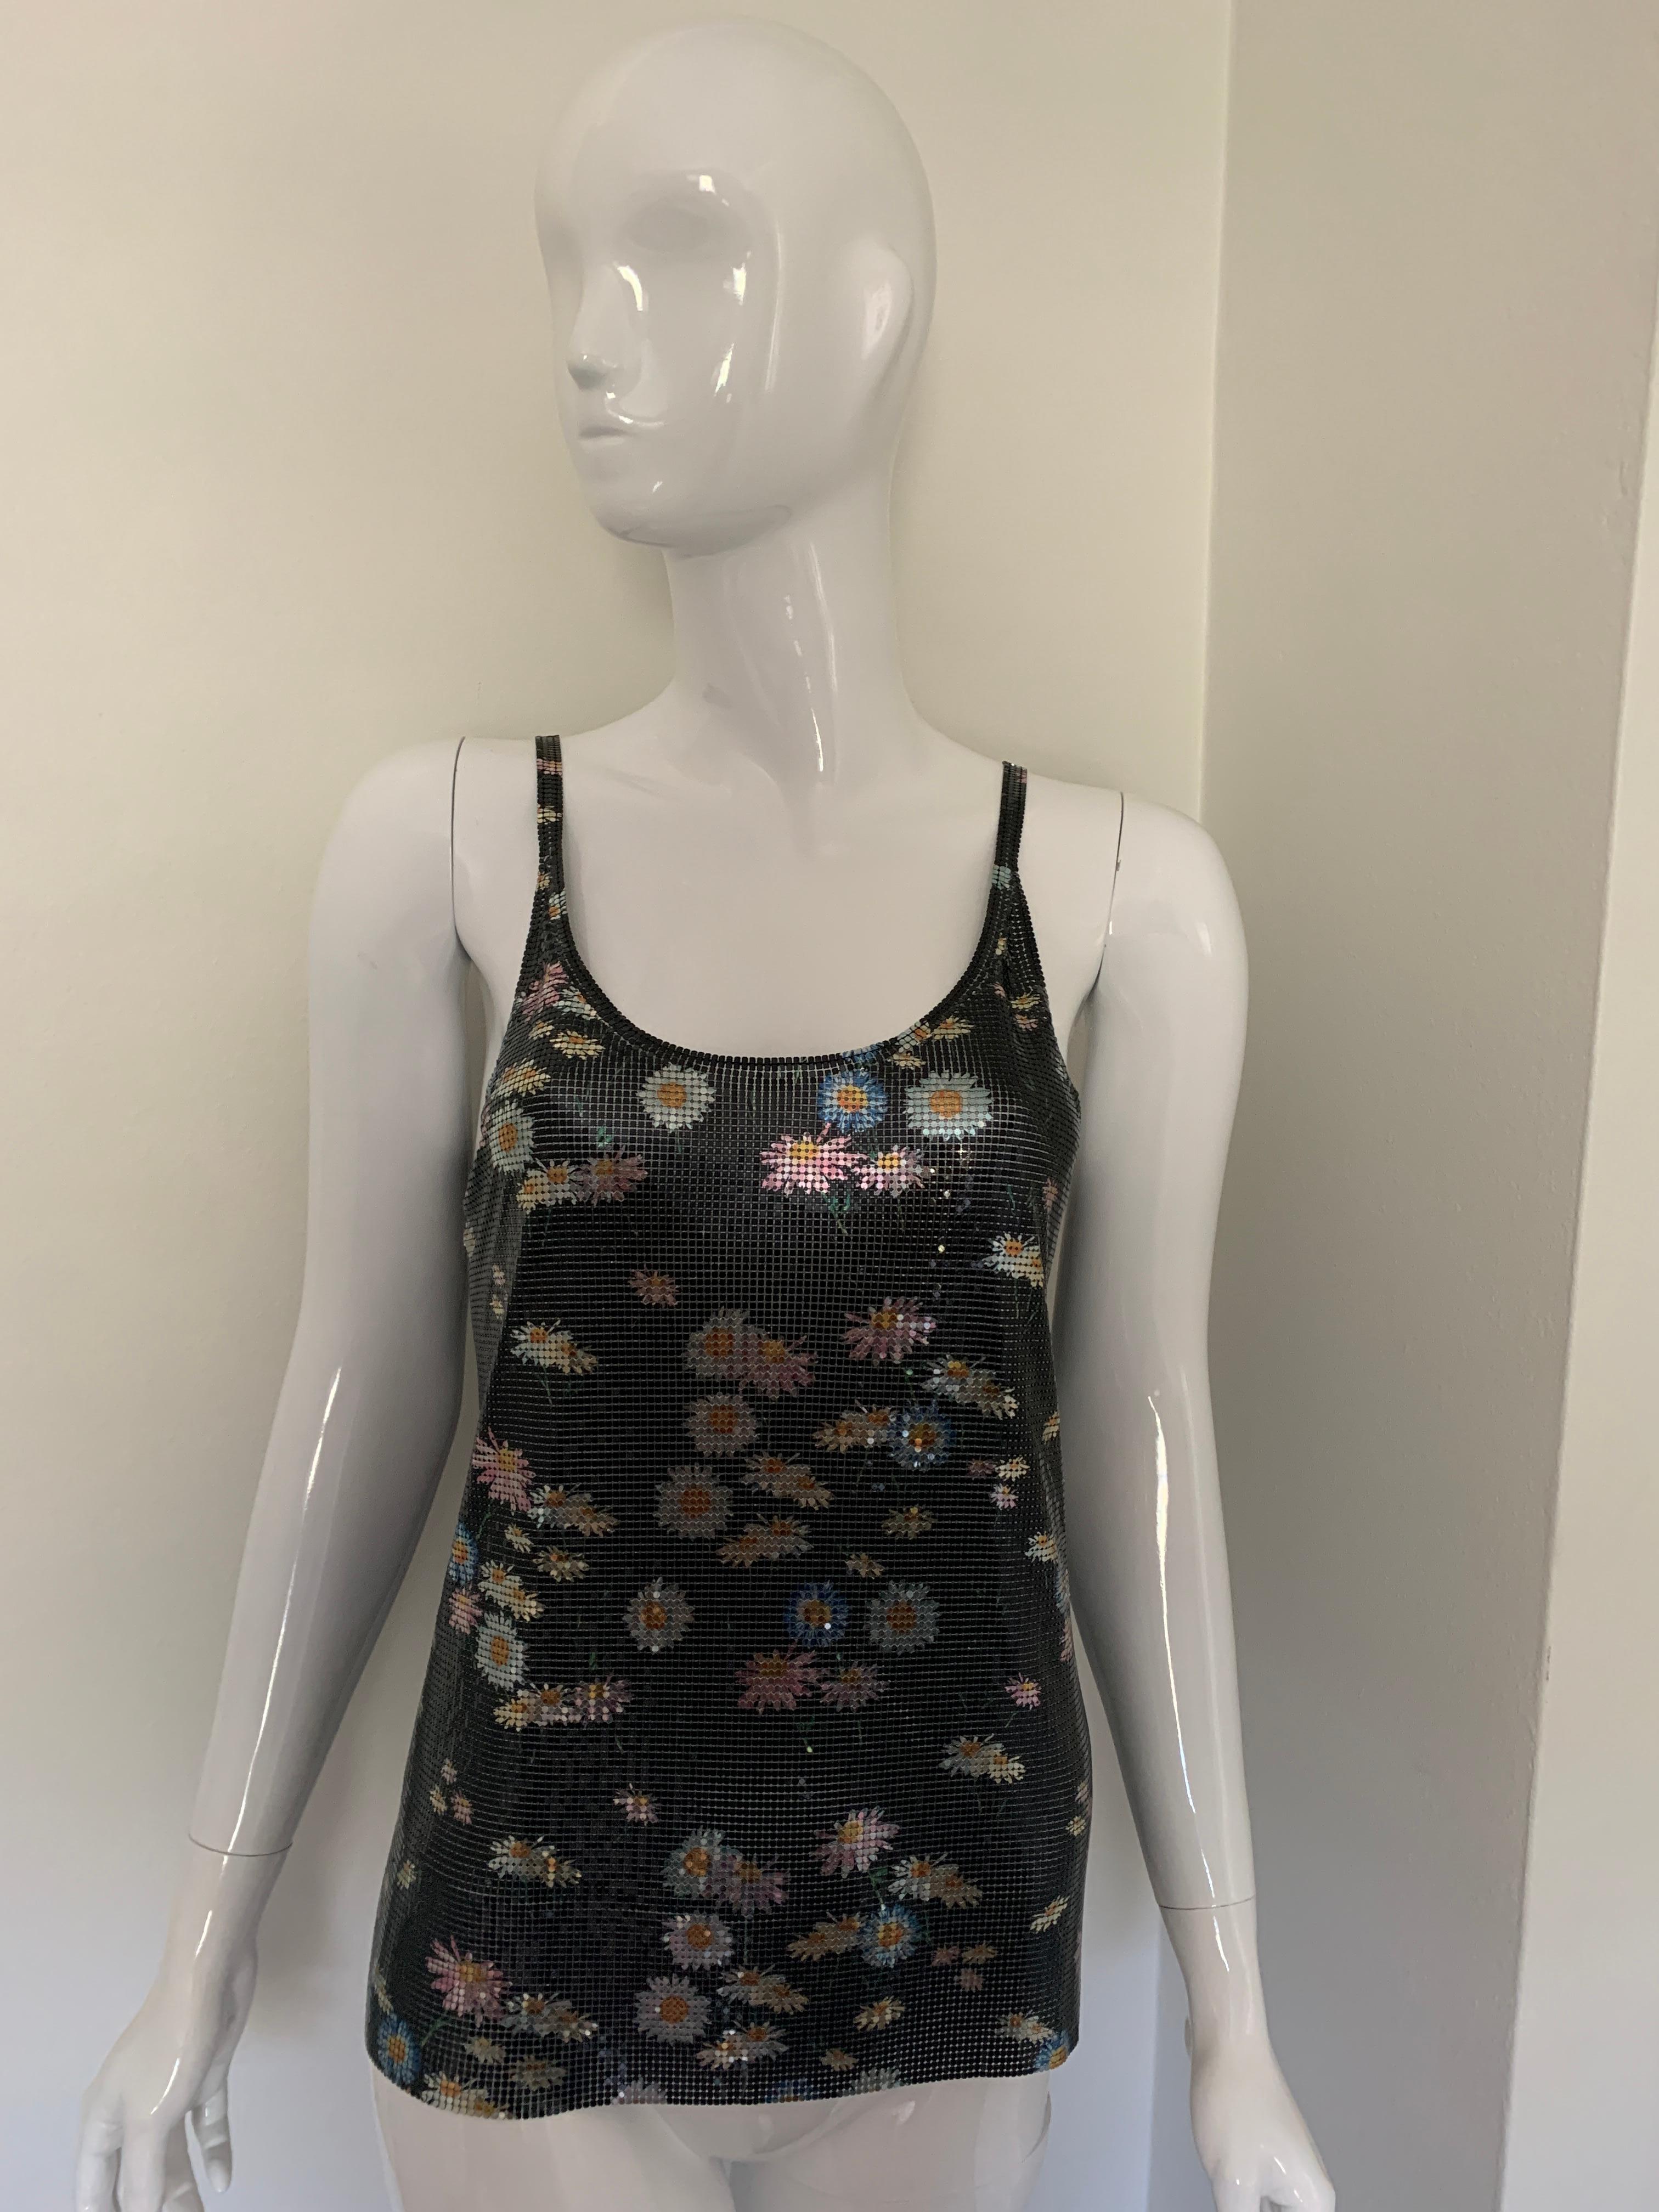 Paco Rabanne Floral Chainmail Tank  In Excellent Condition For Sale In Thousand Oaks, CA